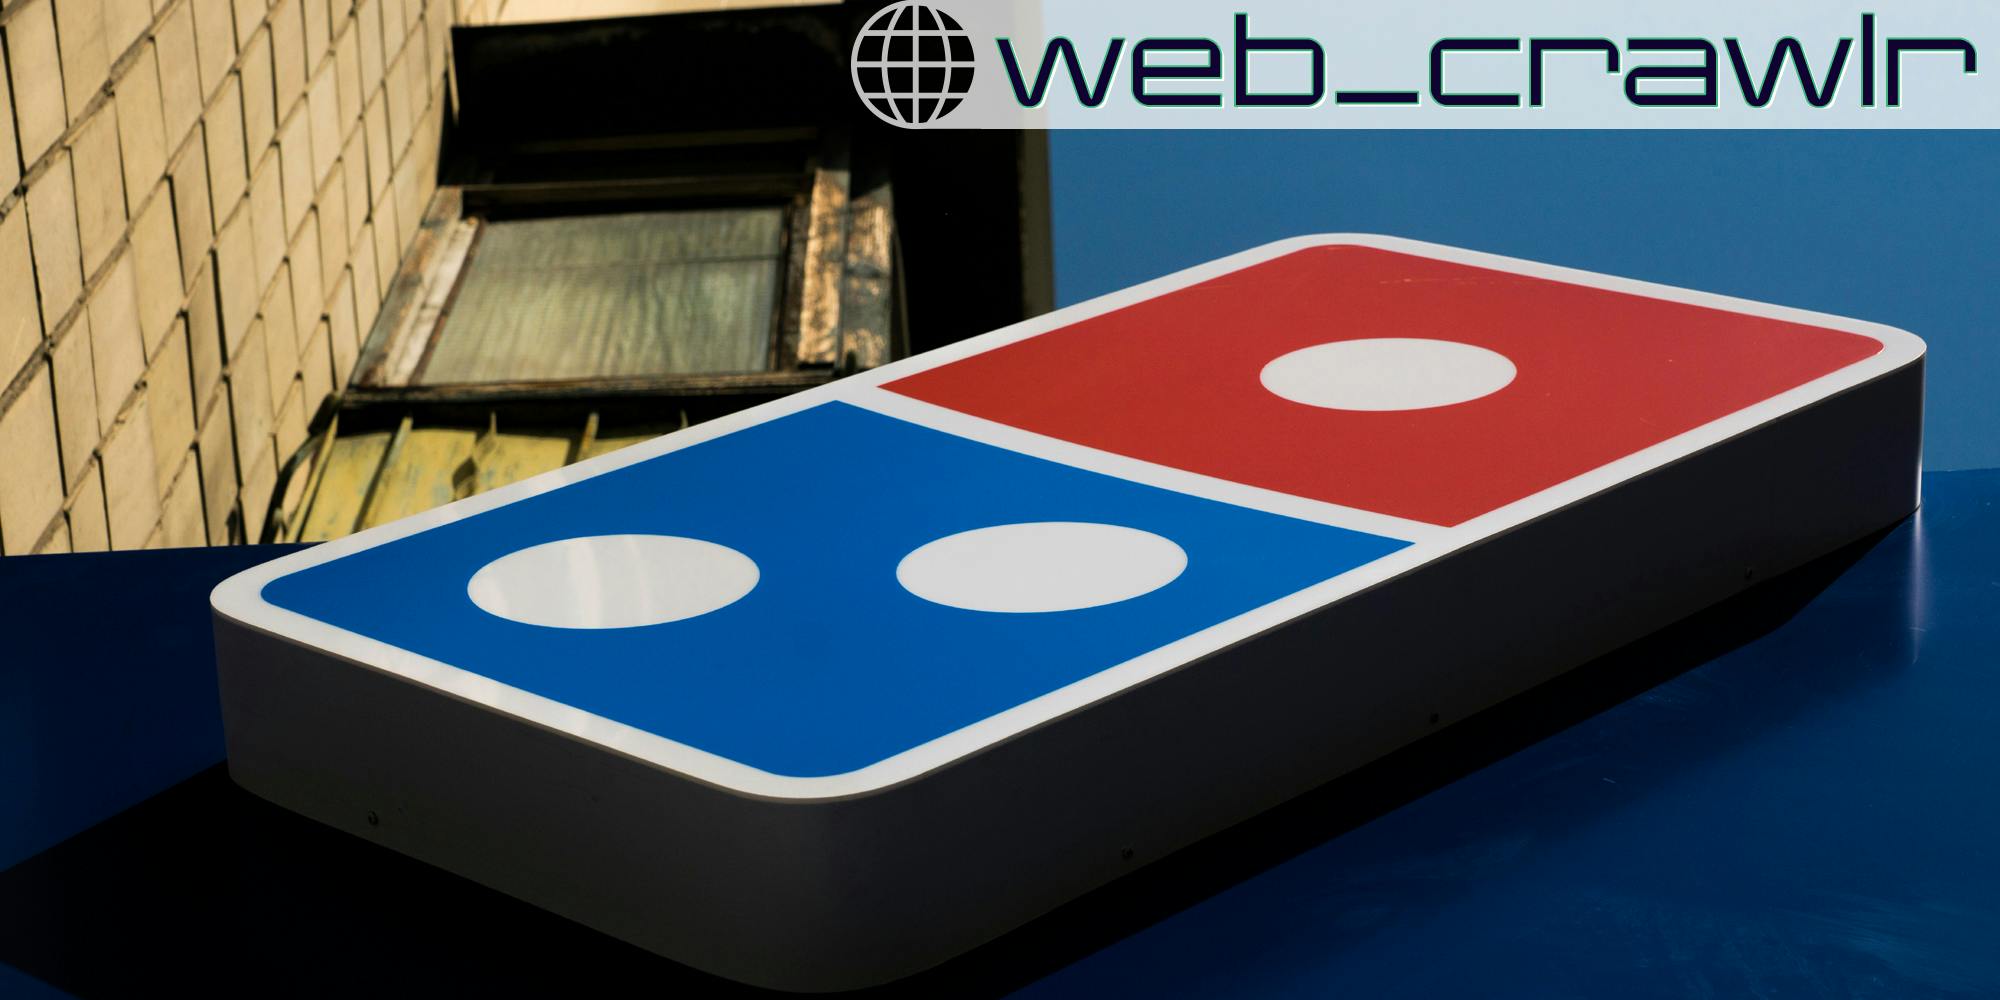 A Domino's pizza sign. The Daily Dot newsletter web_crawlr logo is in the top right corner.